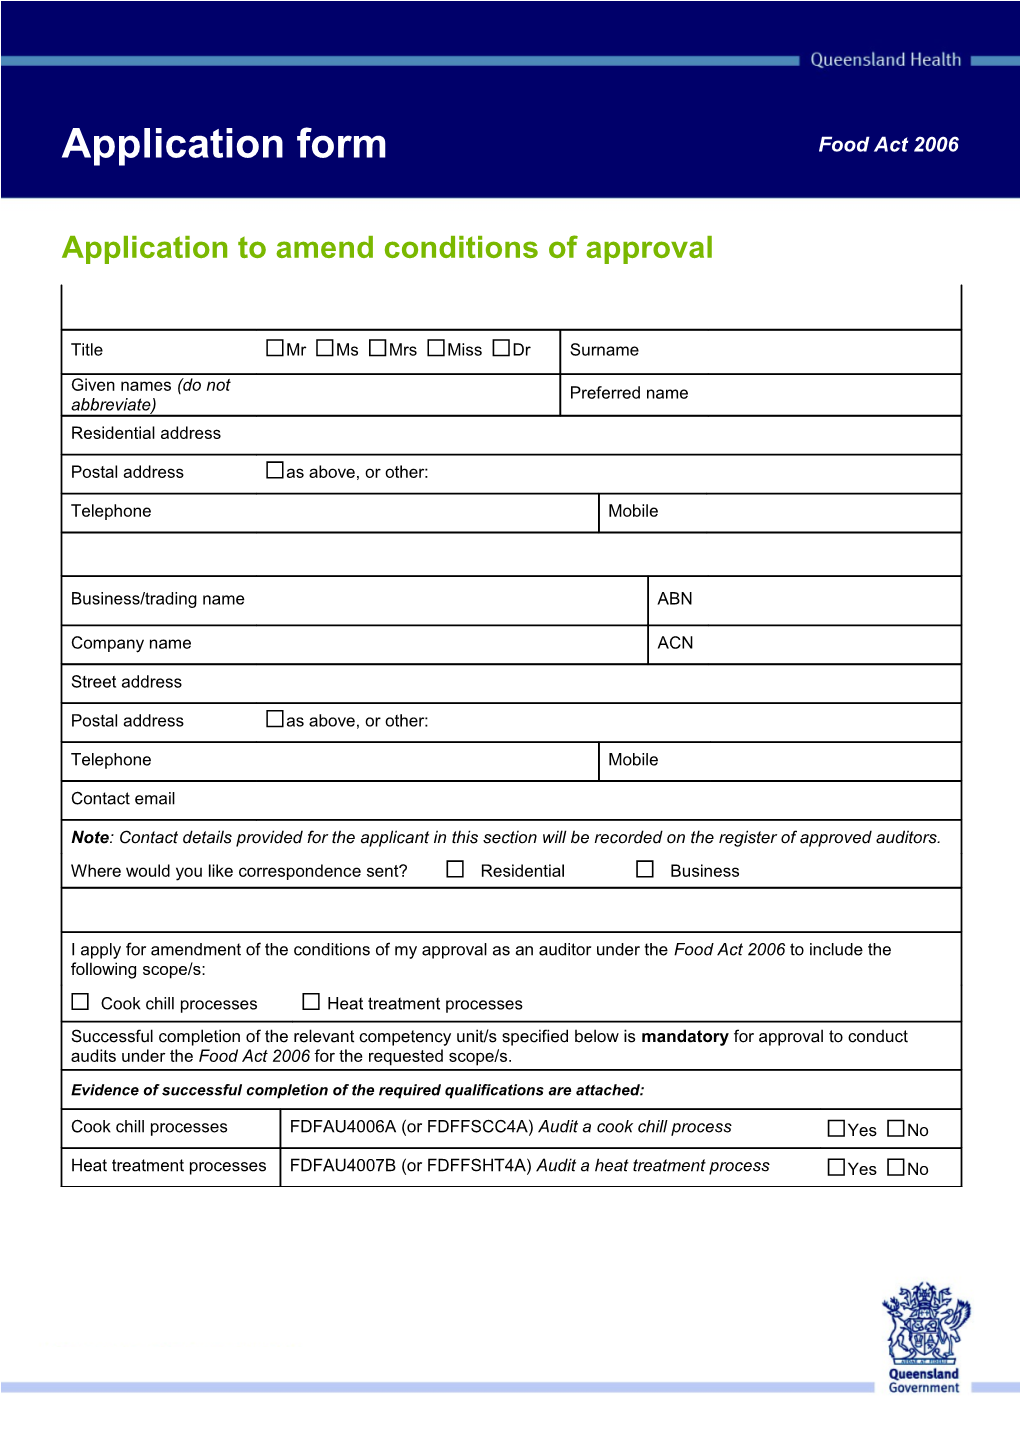 Application to Amend Conditions of Approval As a Food Auditor